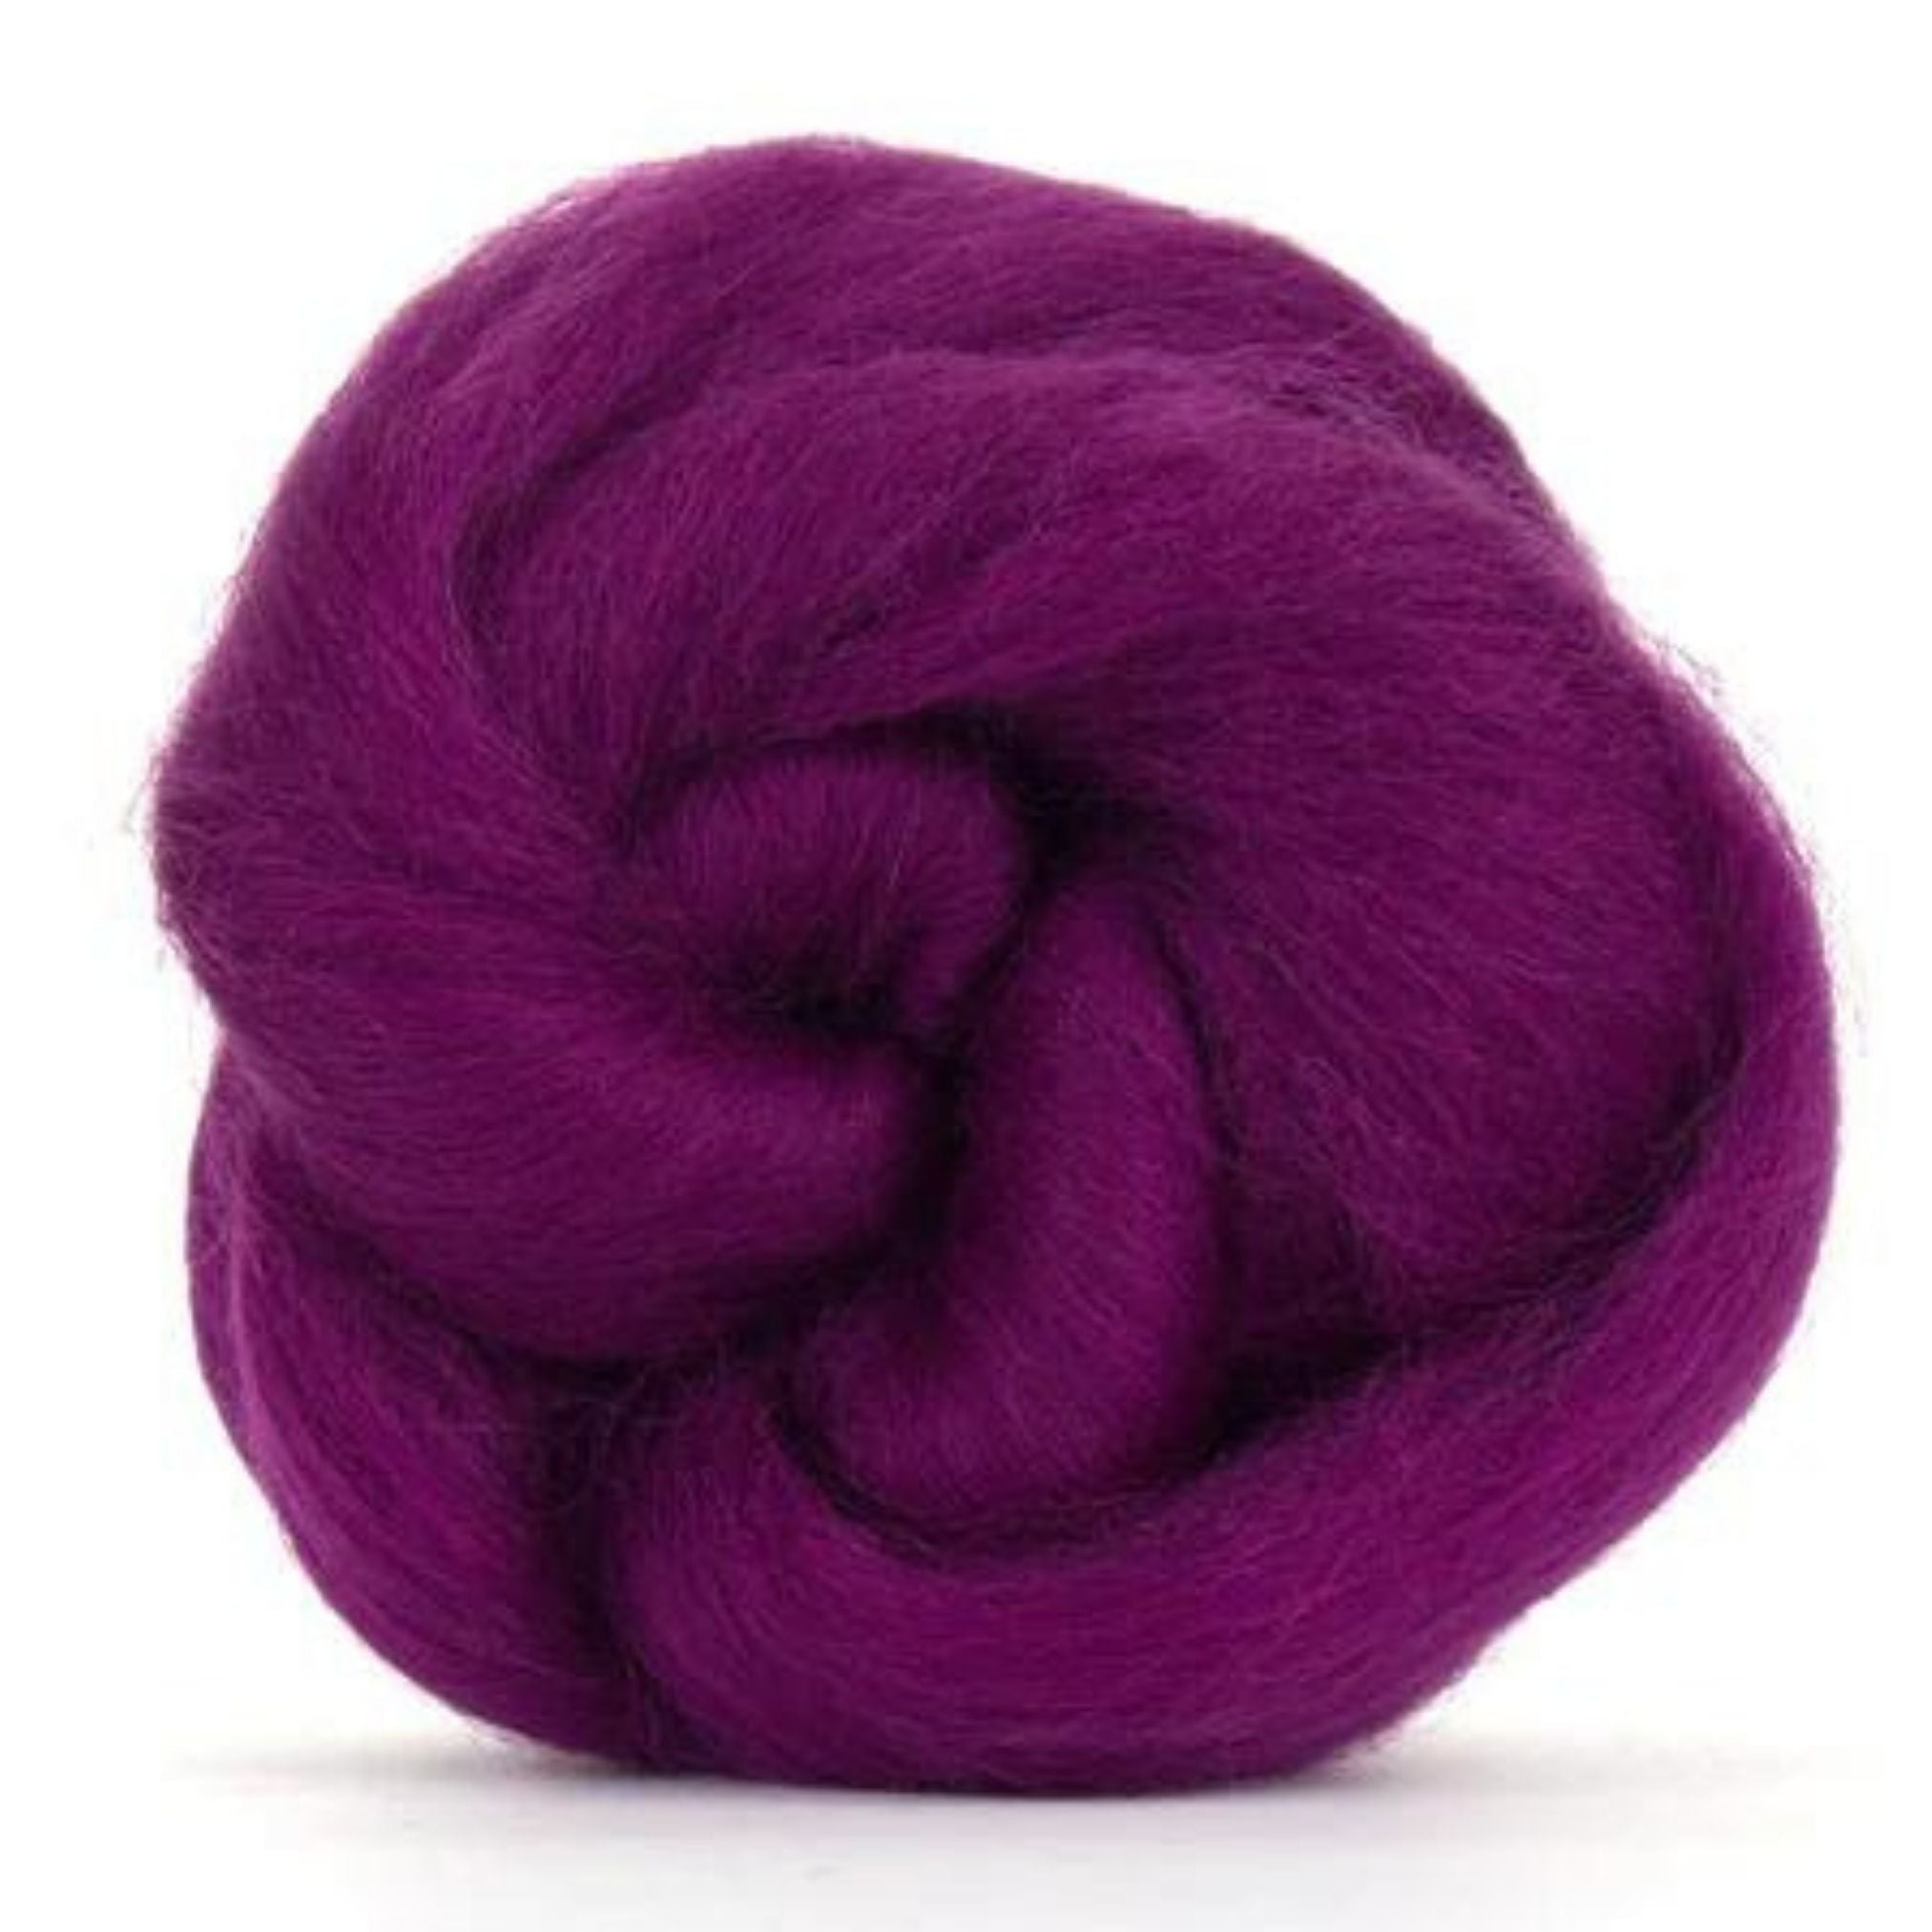 Dyed Corriedale Wool Combed Top | 8 Ounce Bundles